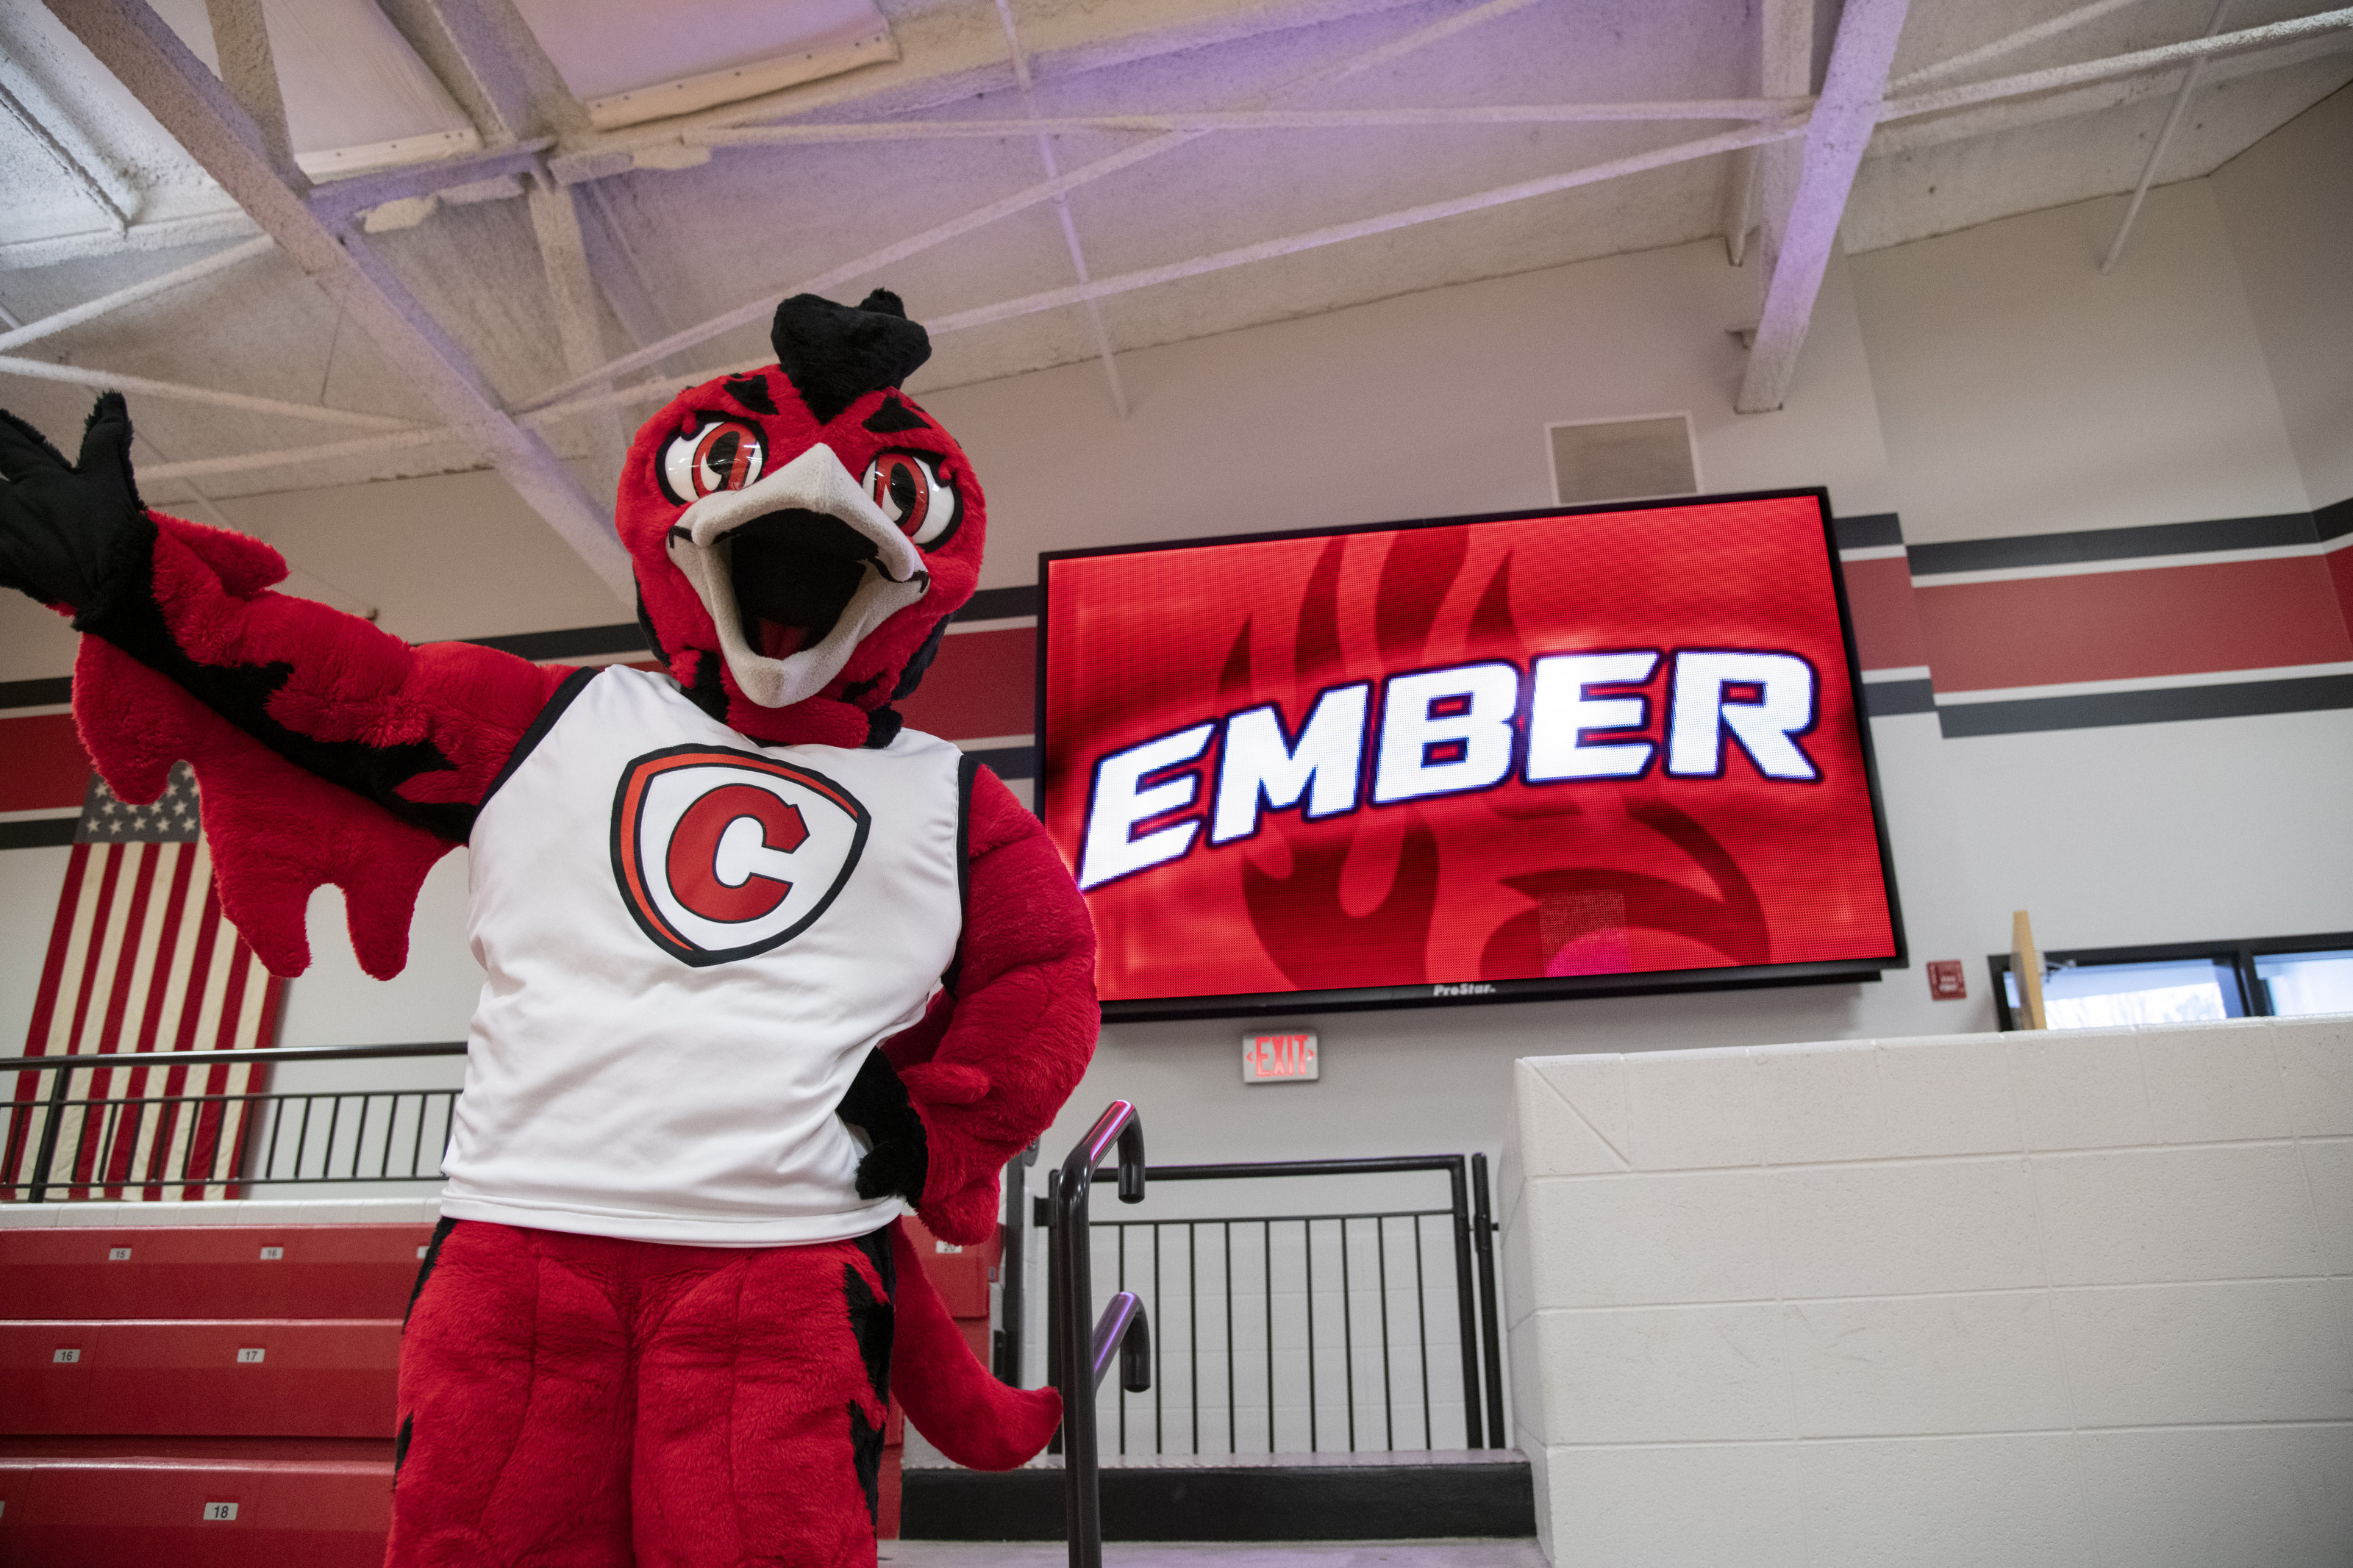 Ember is the College's new mascot.